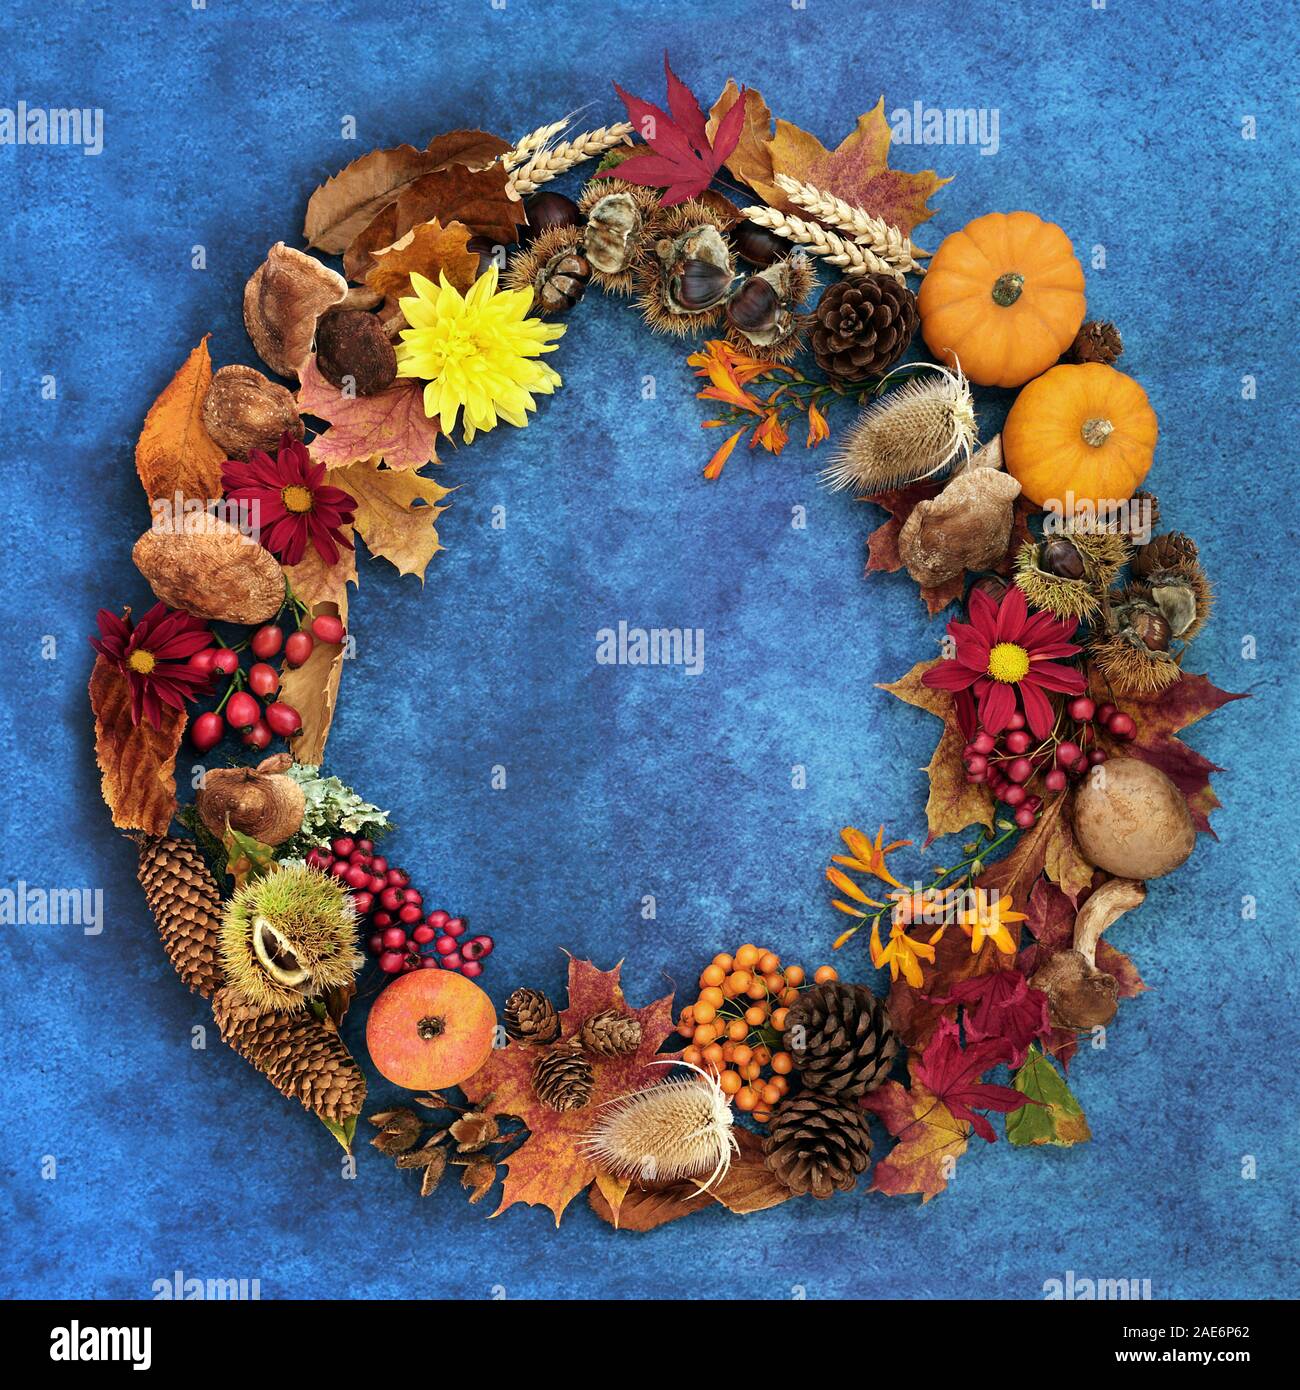 Autumn wreath harvest composition with a variety of natural flora, fauna and food on mottled blue background. Harvest festival theme. Stock Photo